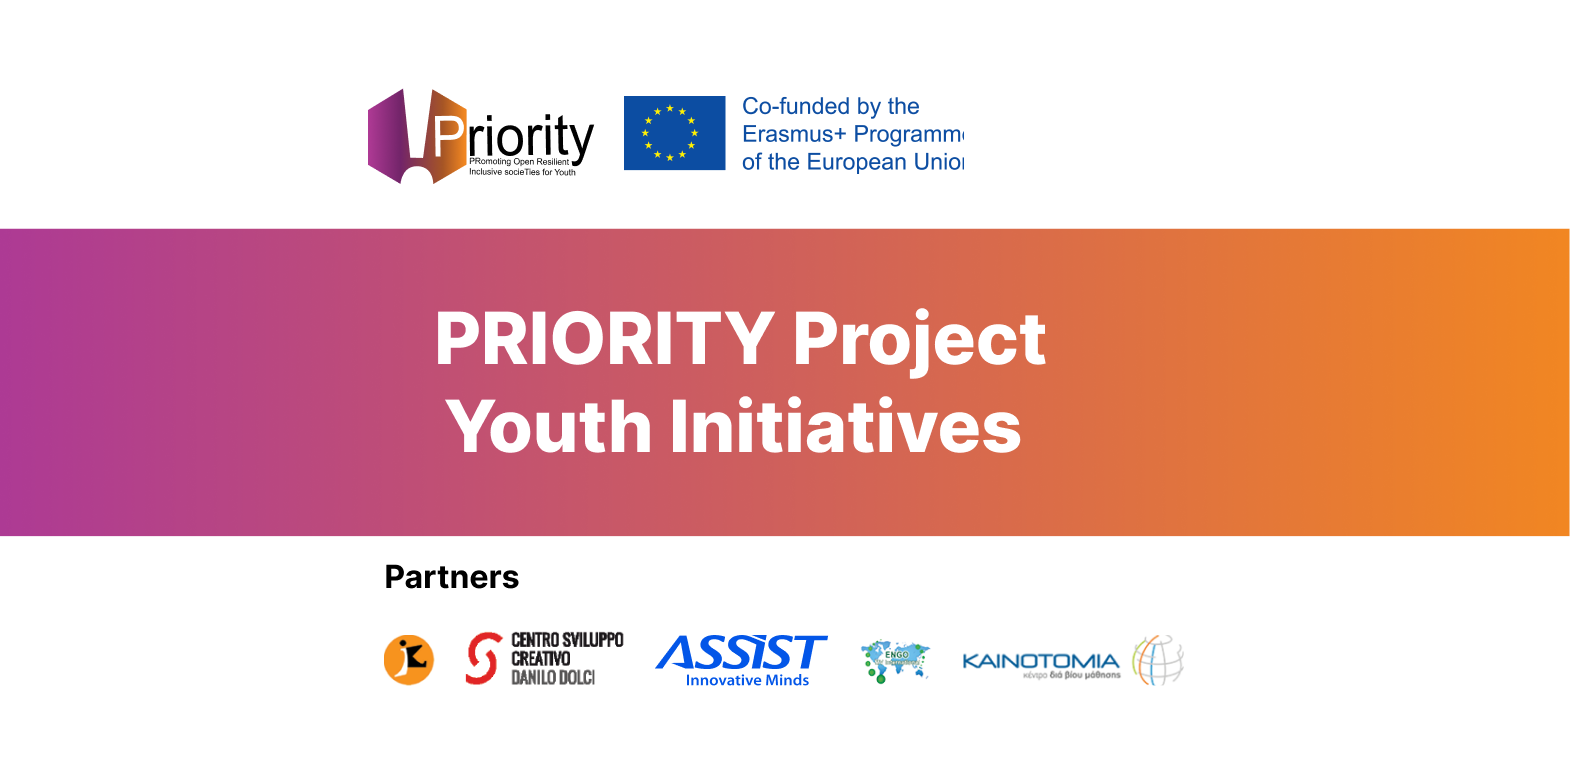 PRIORITY Youth Initiatives